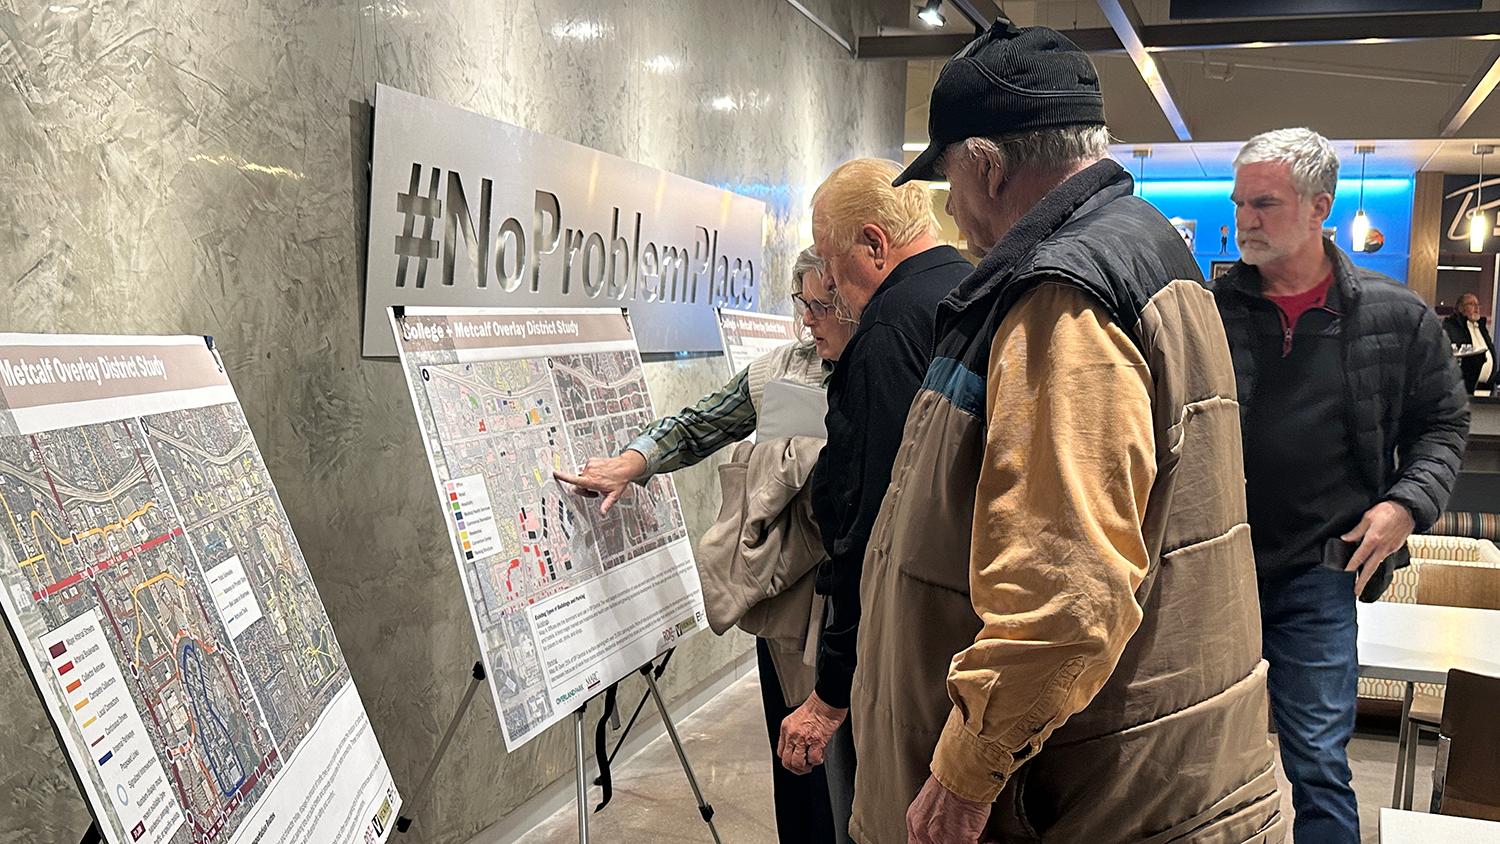 A small group of people look at information presented on a display board at a public information meeting.